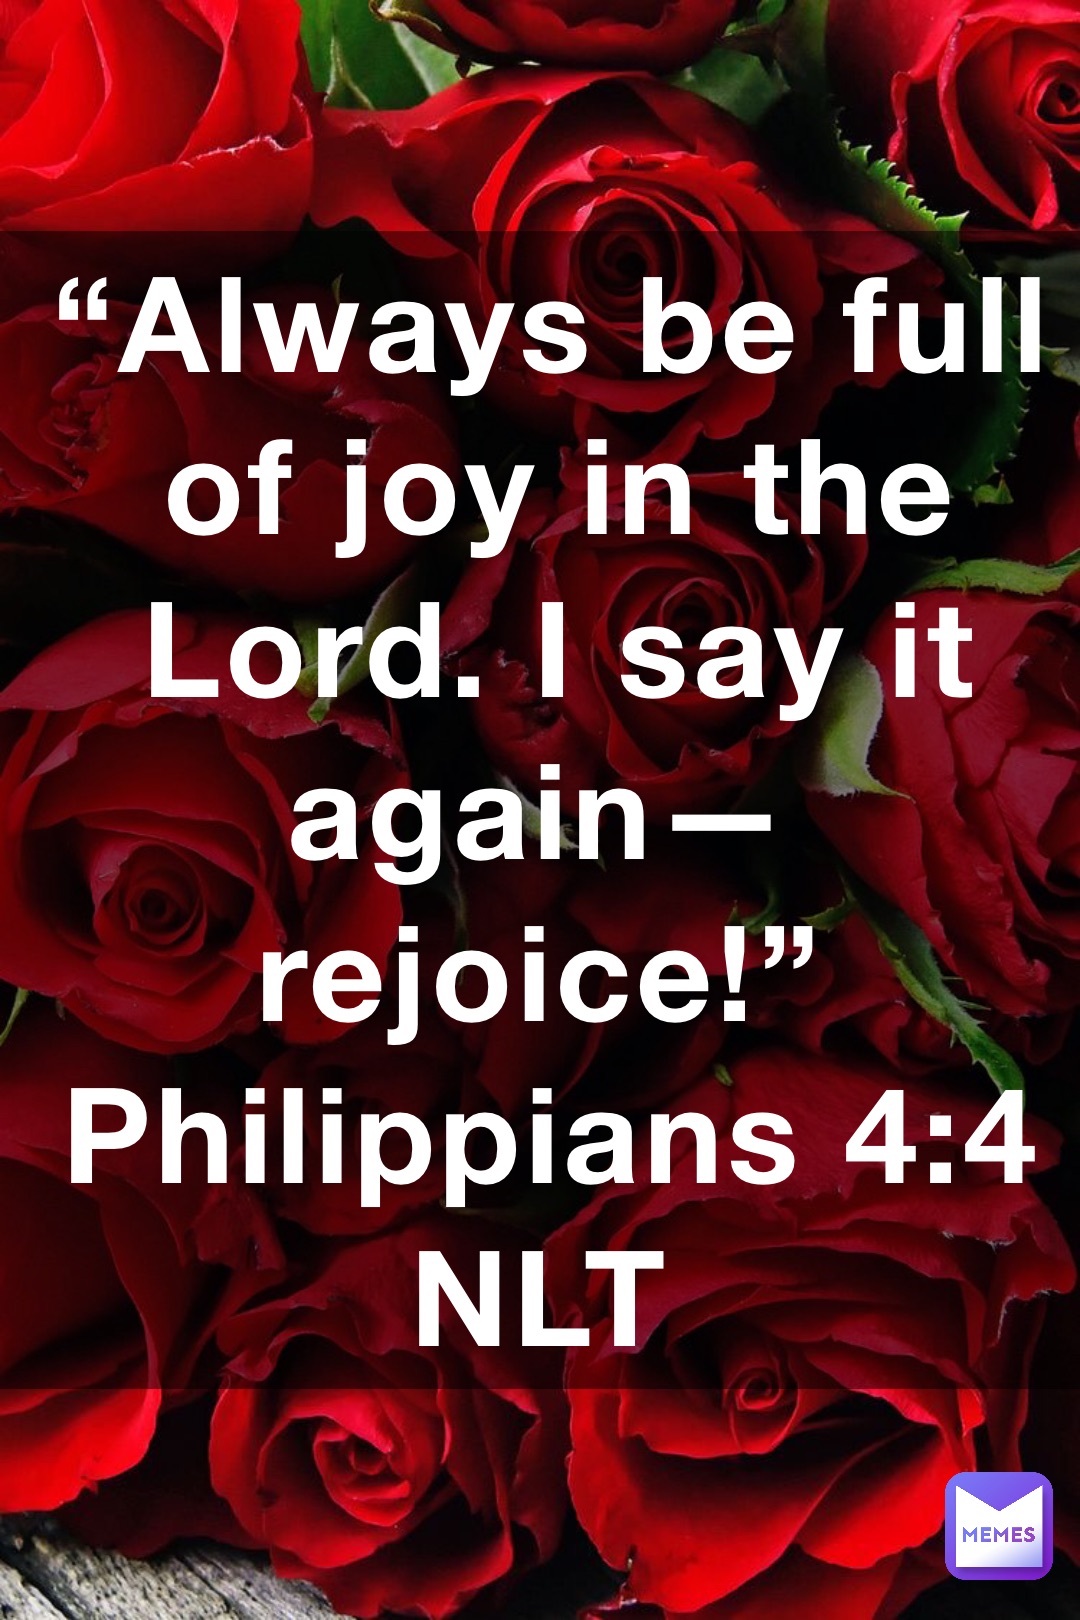 “Always be full of joy in the Lord. I say it again—rejoice!”
‭‭Philippians‬ ‭4:4‬ ‭NLT‬‬